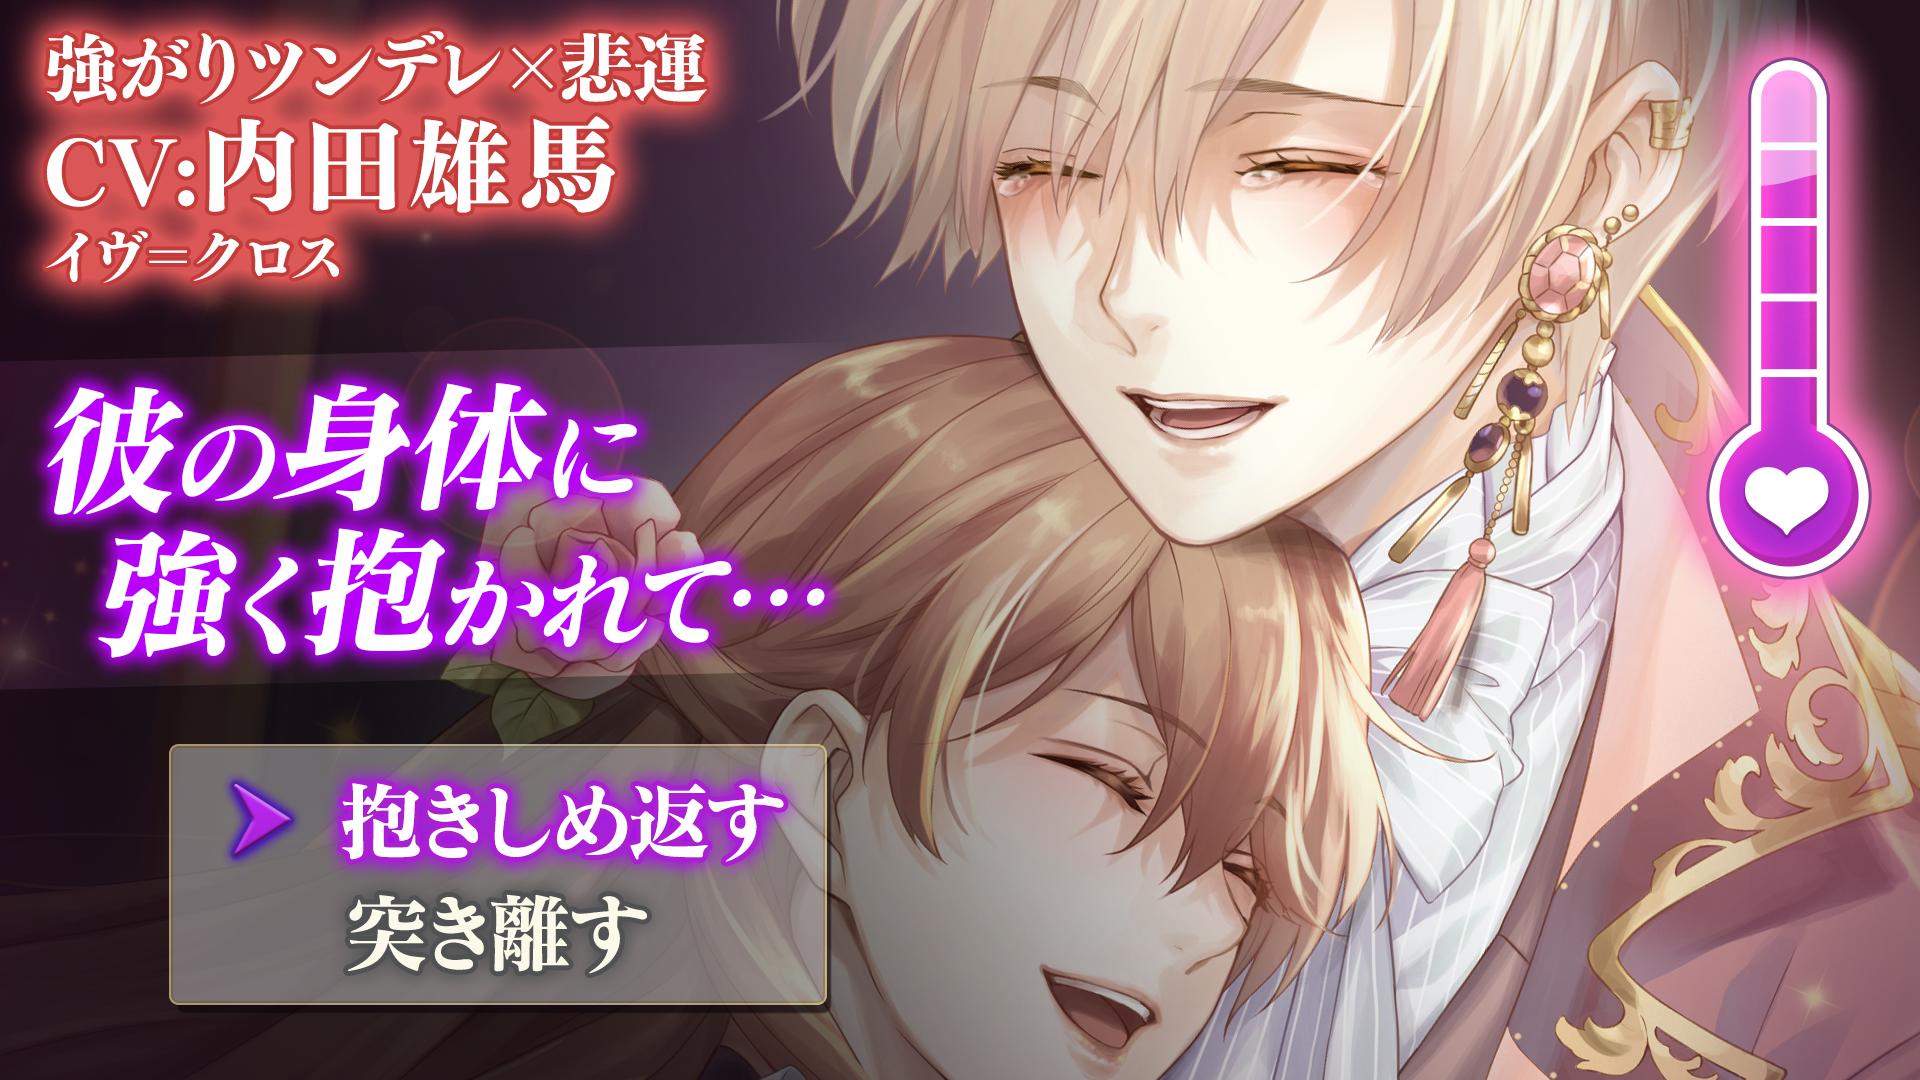 Twilight crusade romance otome game мод. My young boyfriend Otome game. Episode boys Love: choices.